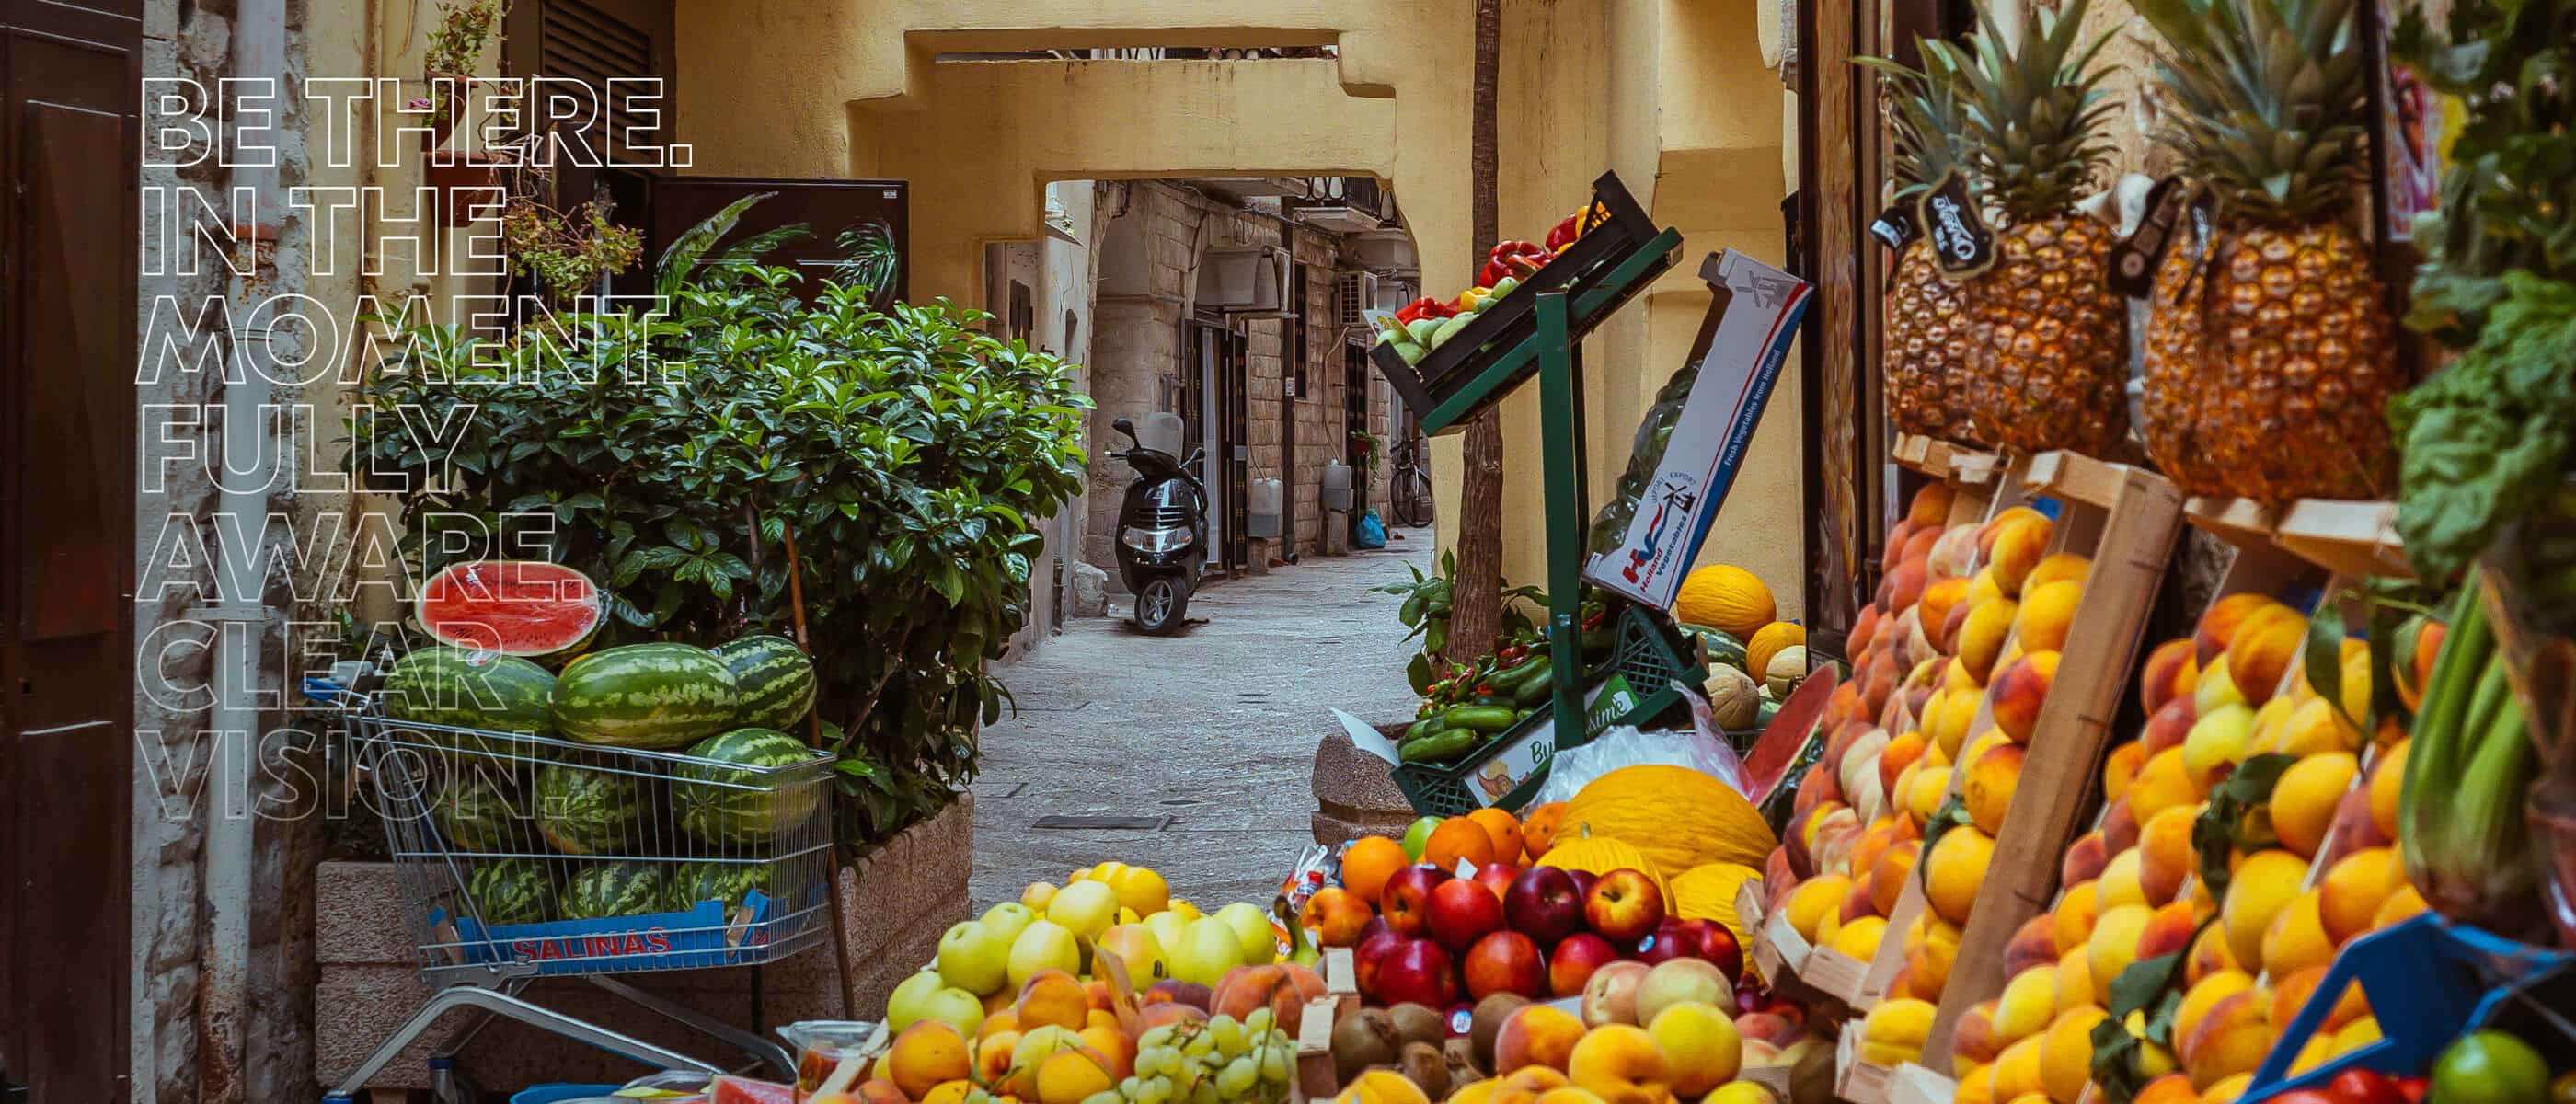 fruit stand in an alleyway taken with the NIKKOR Z DX 18-140mm f/3.5-6.3 VR